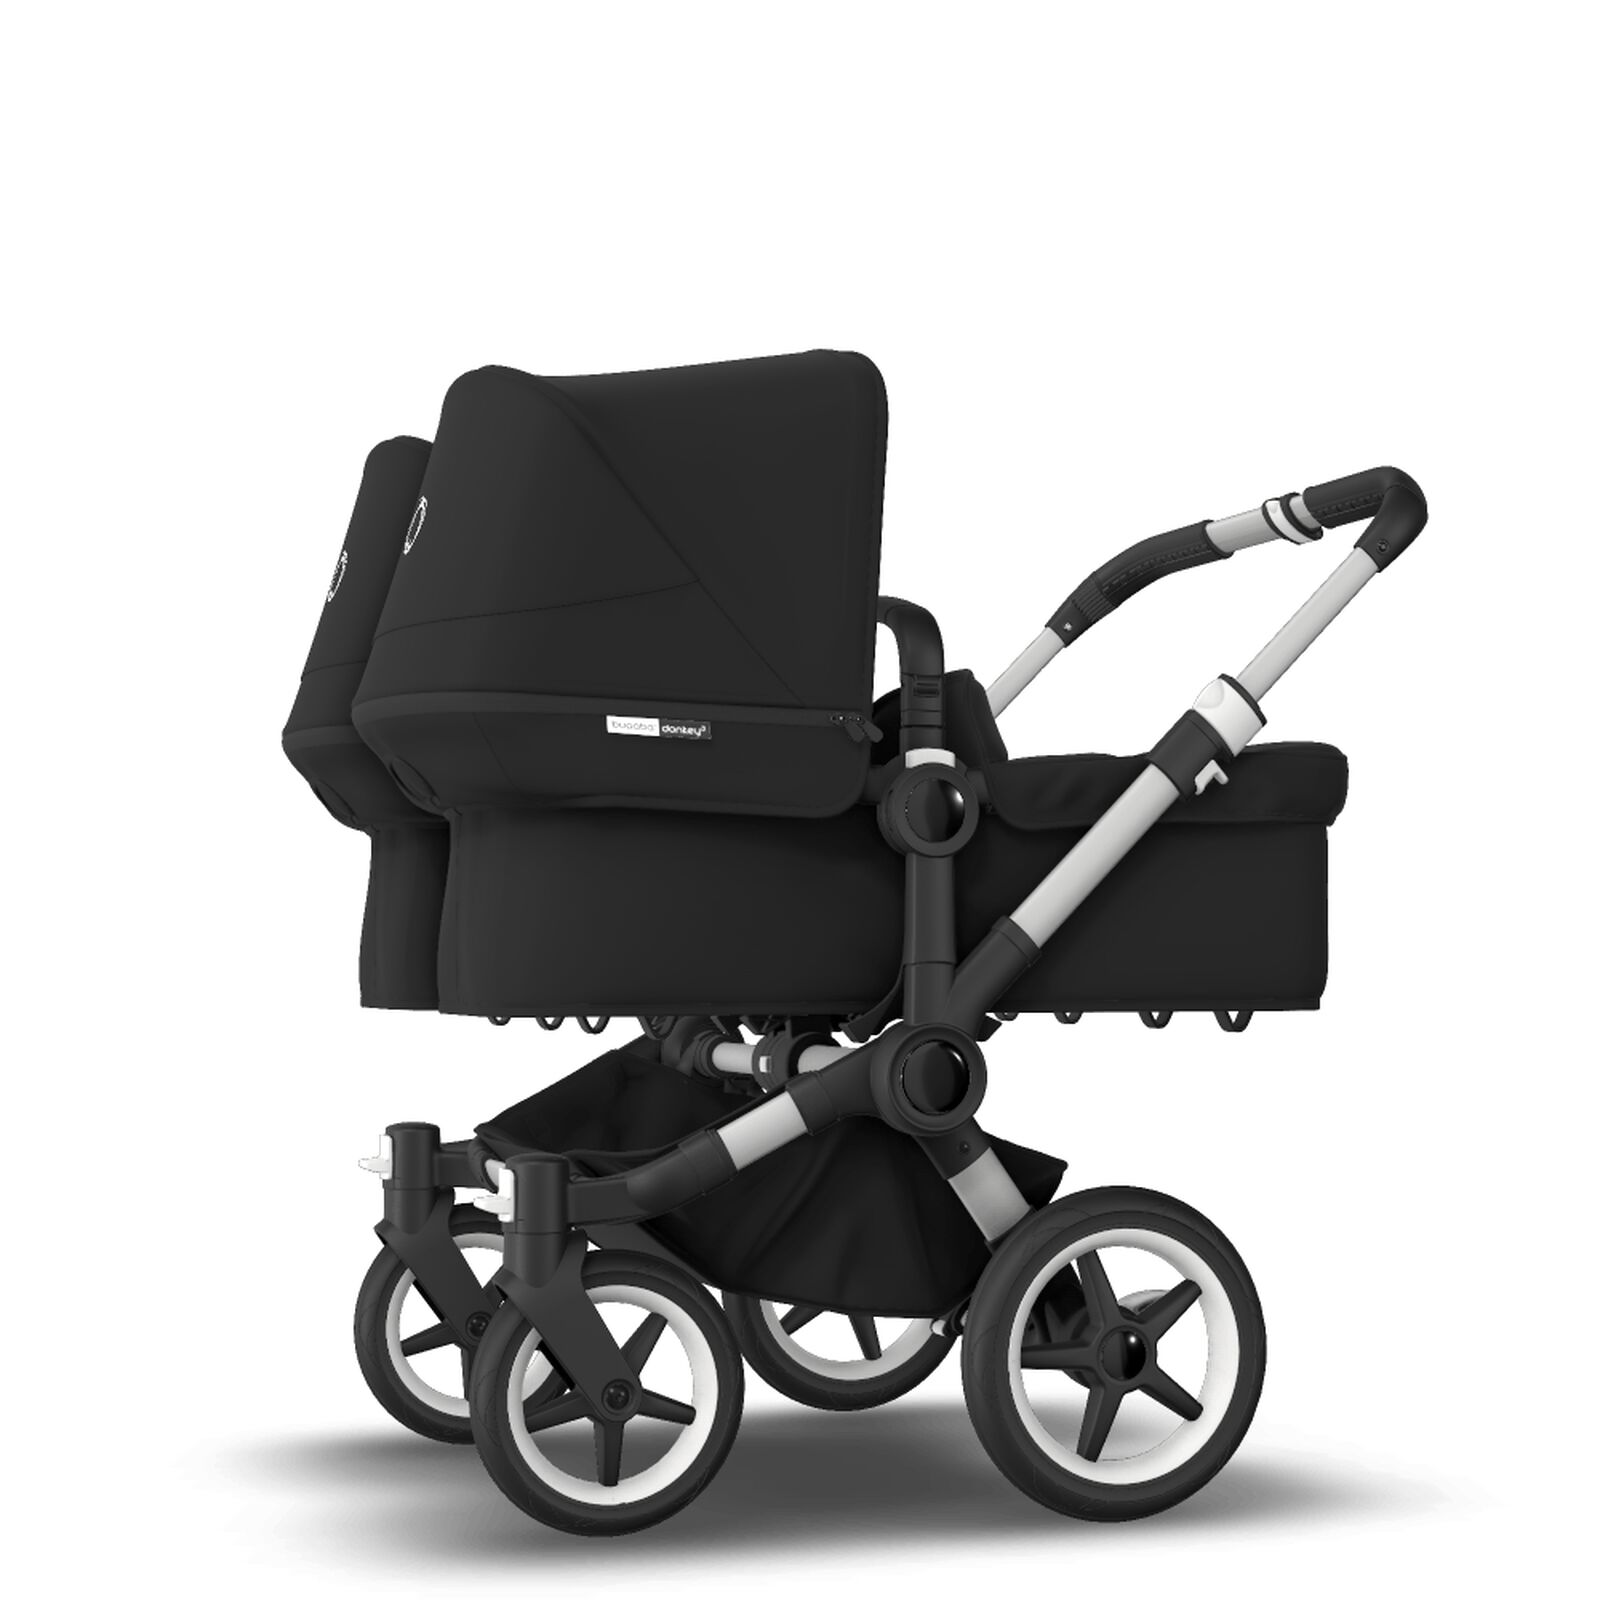 Bugaboo Donkey 3 Twin travel system - View 9